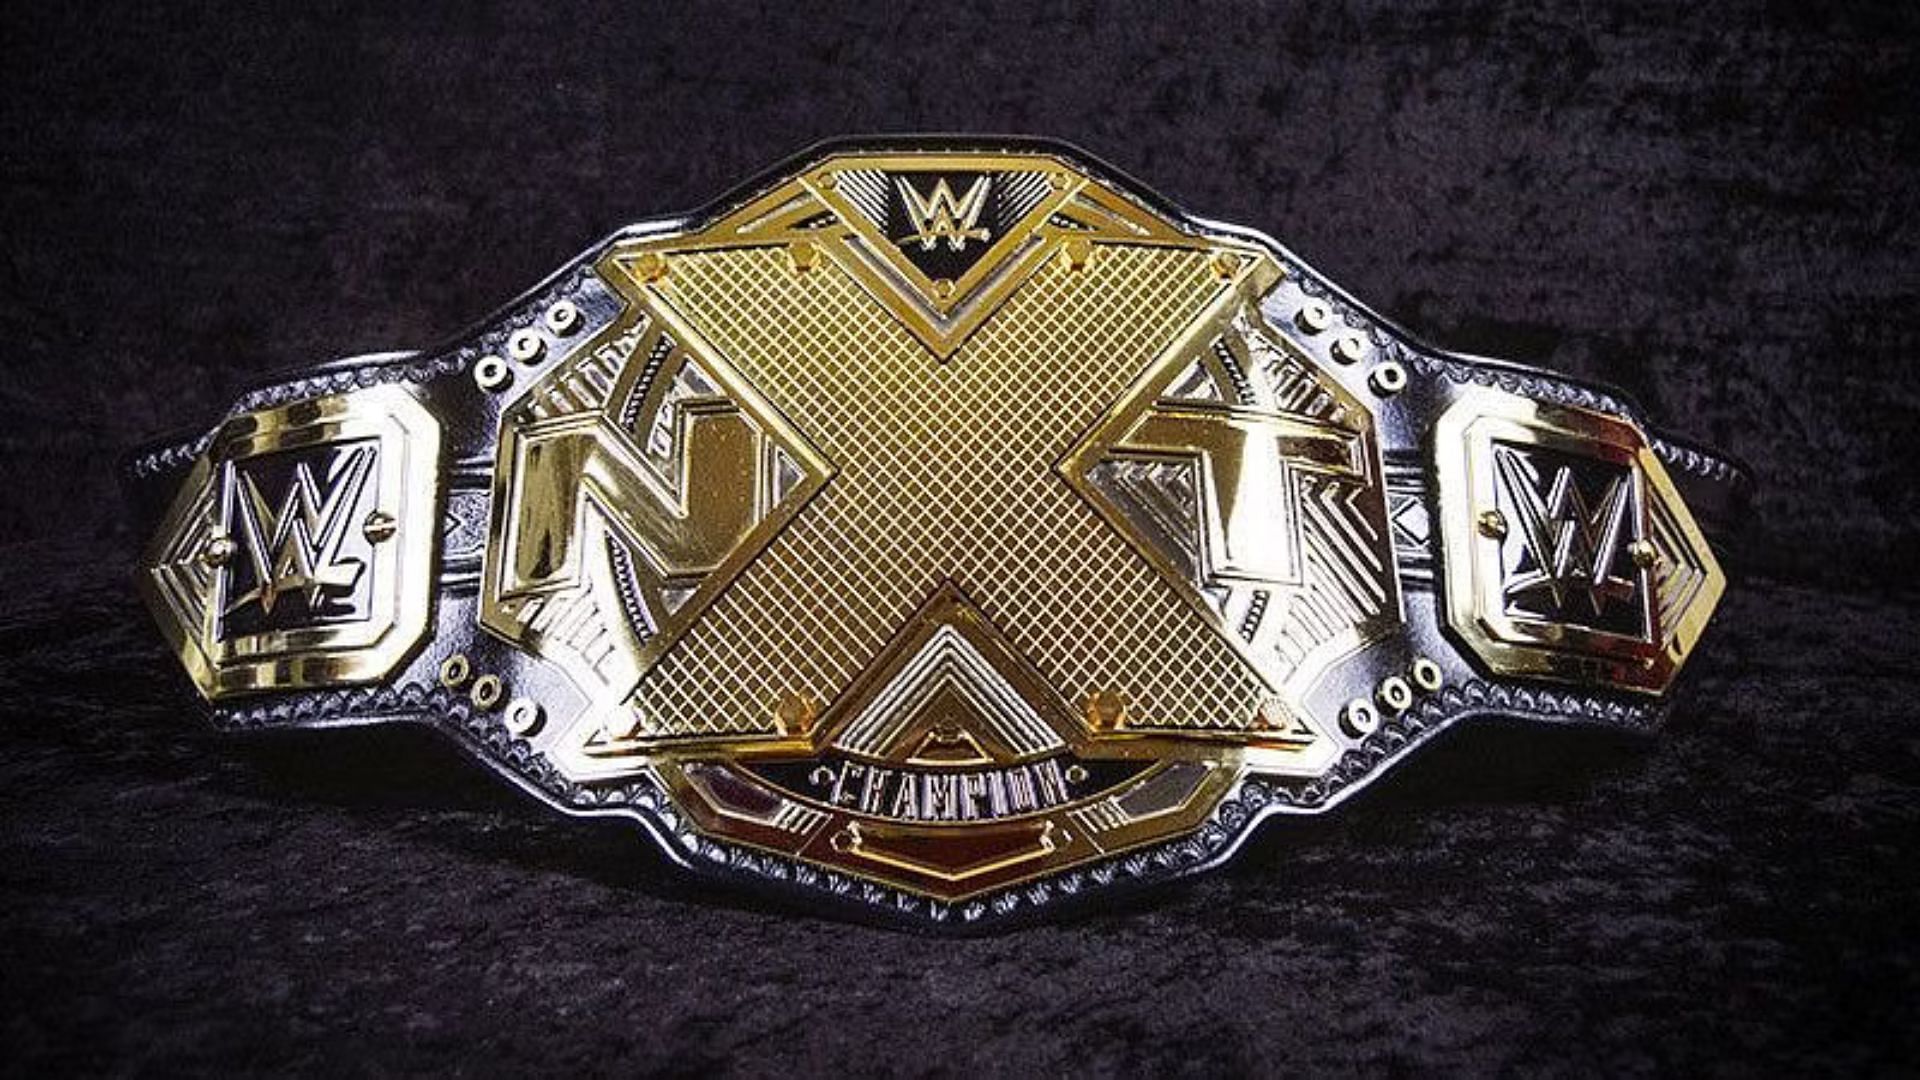 The NXT Championship is the top prize of the Black and Gold brand